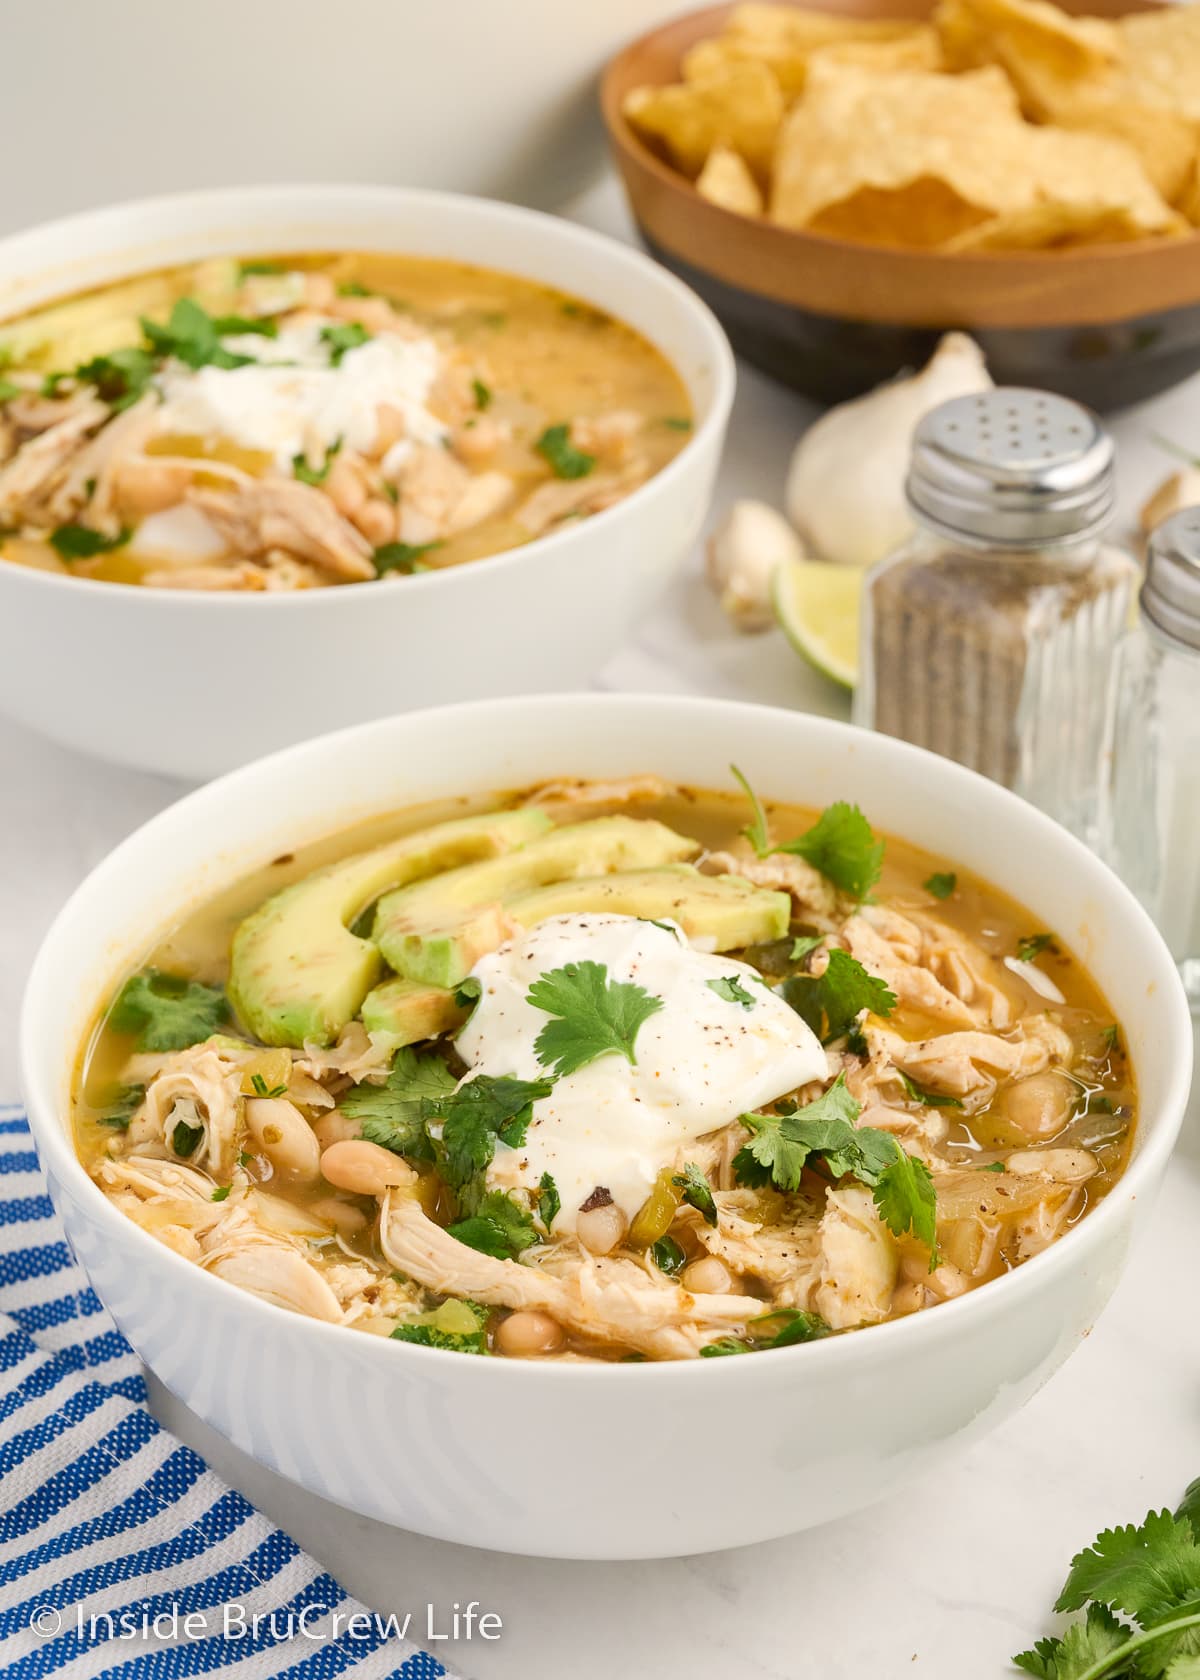 Two white bowls filled with white chicken chili and topped with sour cream and avocados.